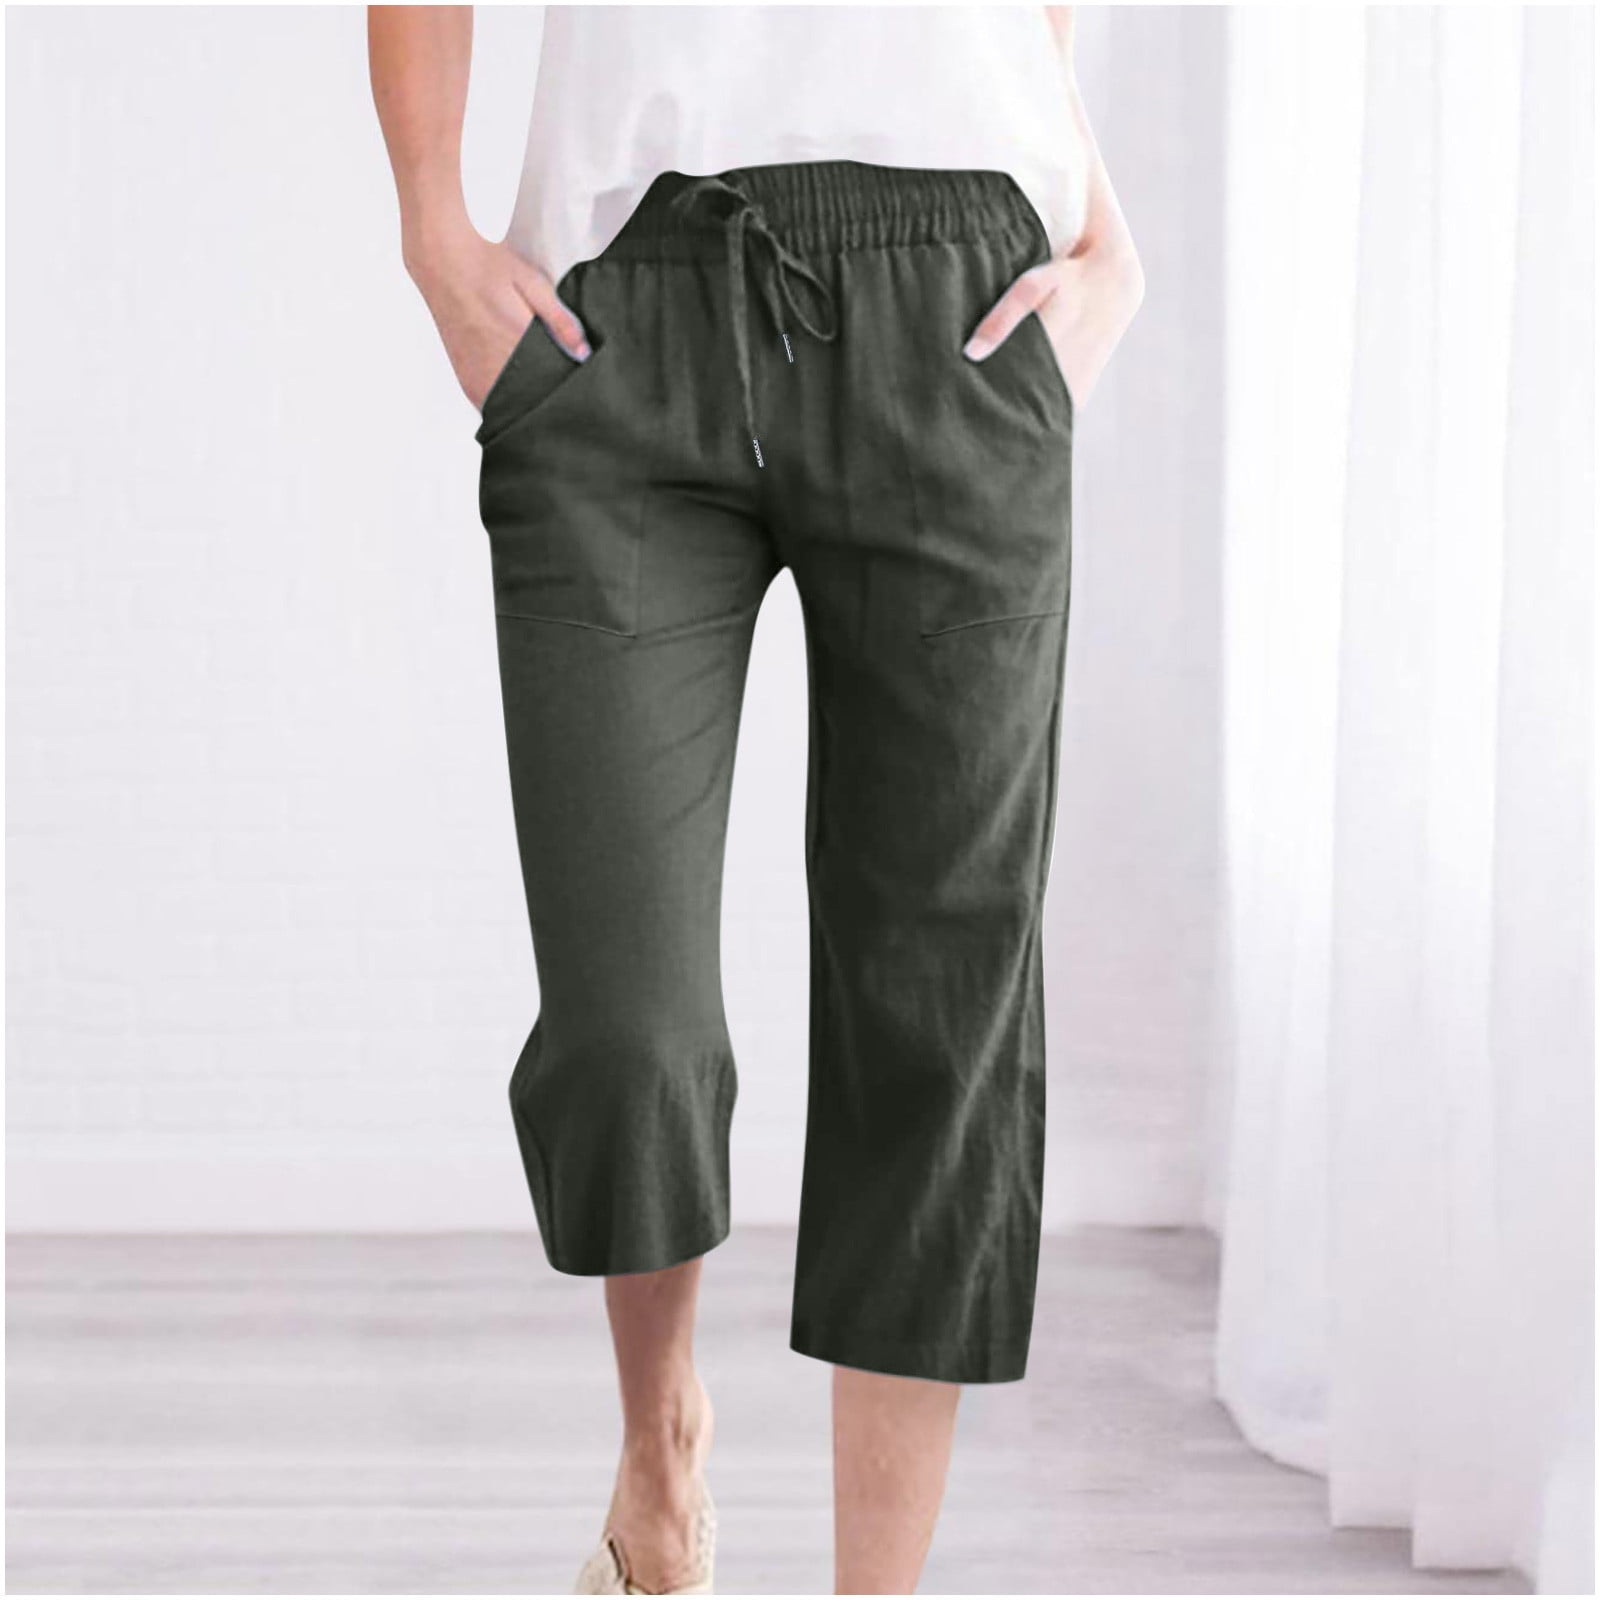 amidoa Capris for Women Casual Drawstring Elastic Waist Trousers with ...